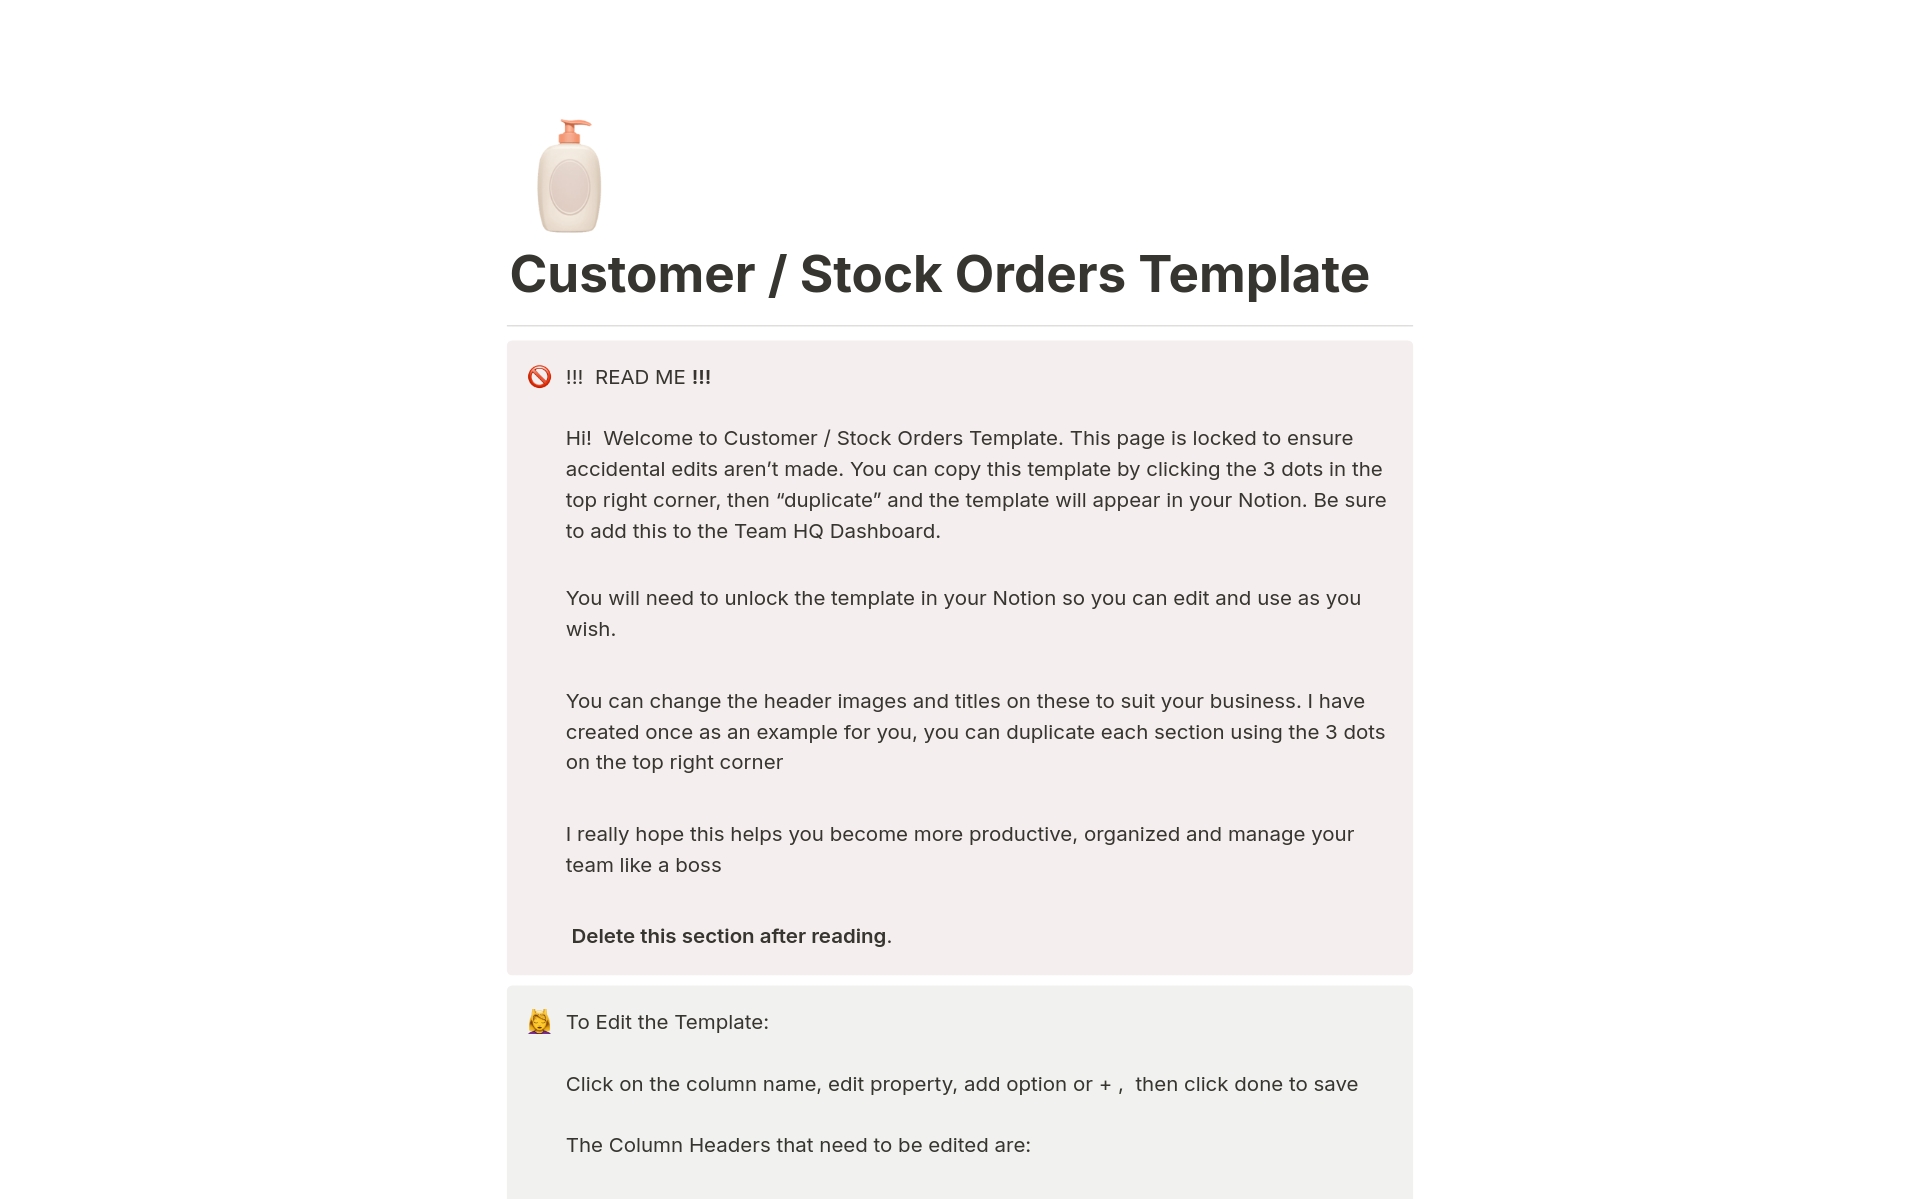 We have designed a Customer Order / Stock Order Tracker that is to help salon owners keep track of their stock and customer orders efficiently.